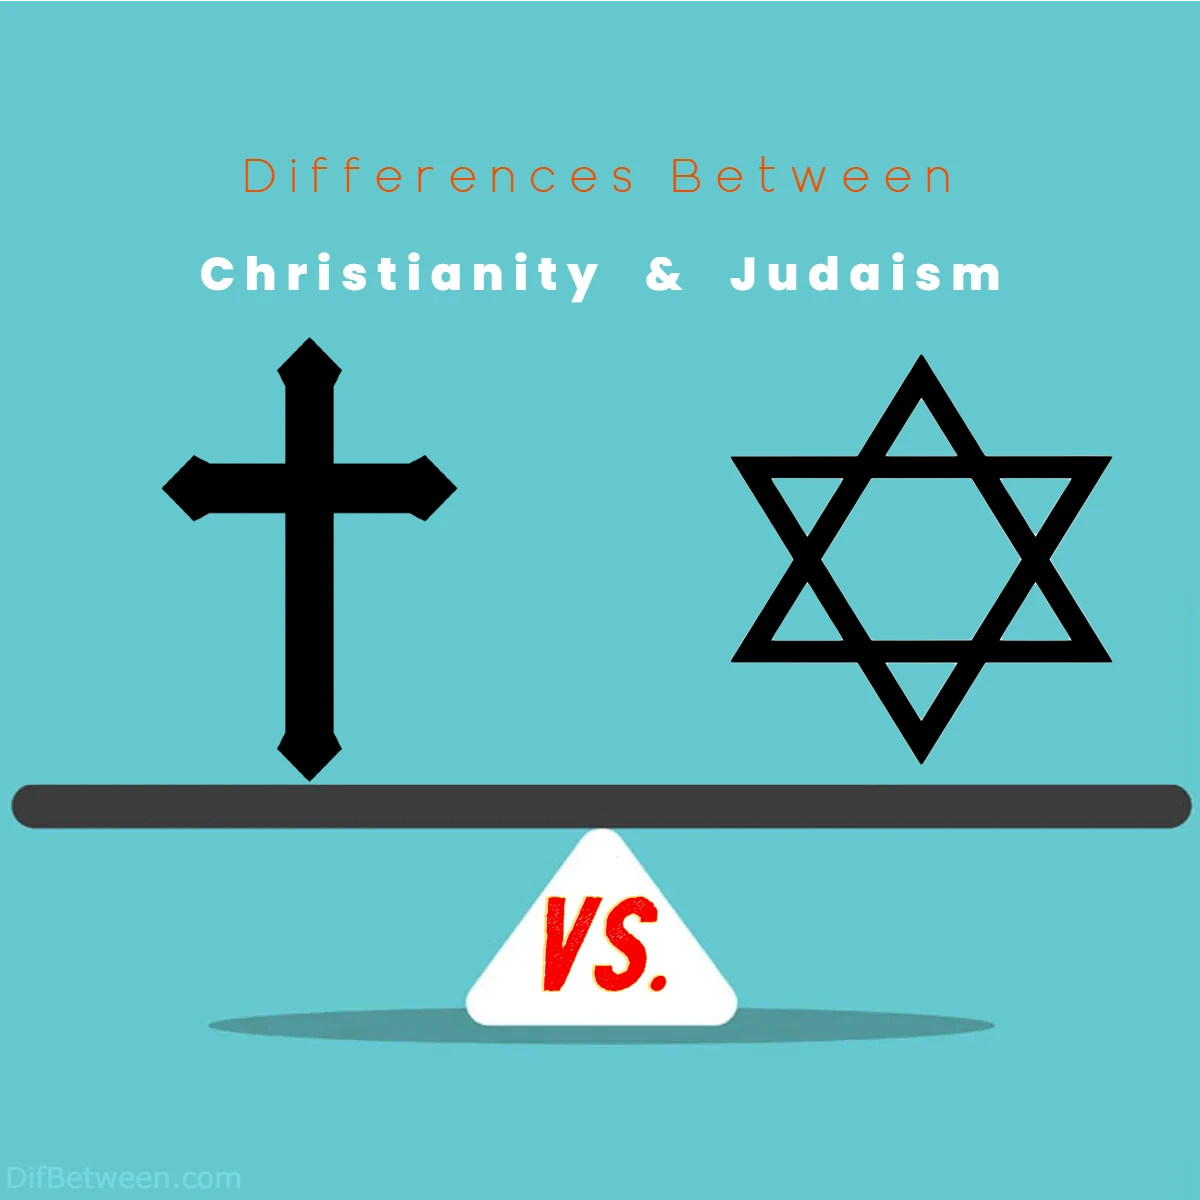 Differences Between Christianity vs Judaism